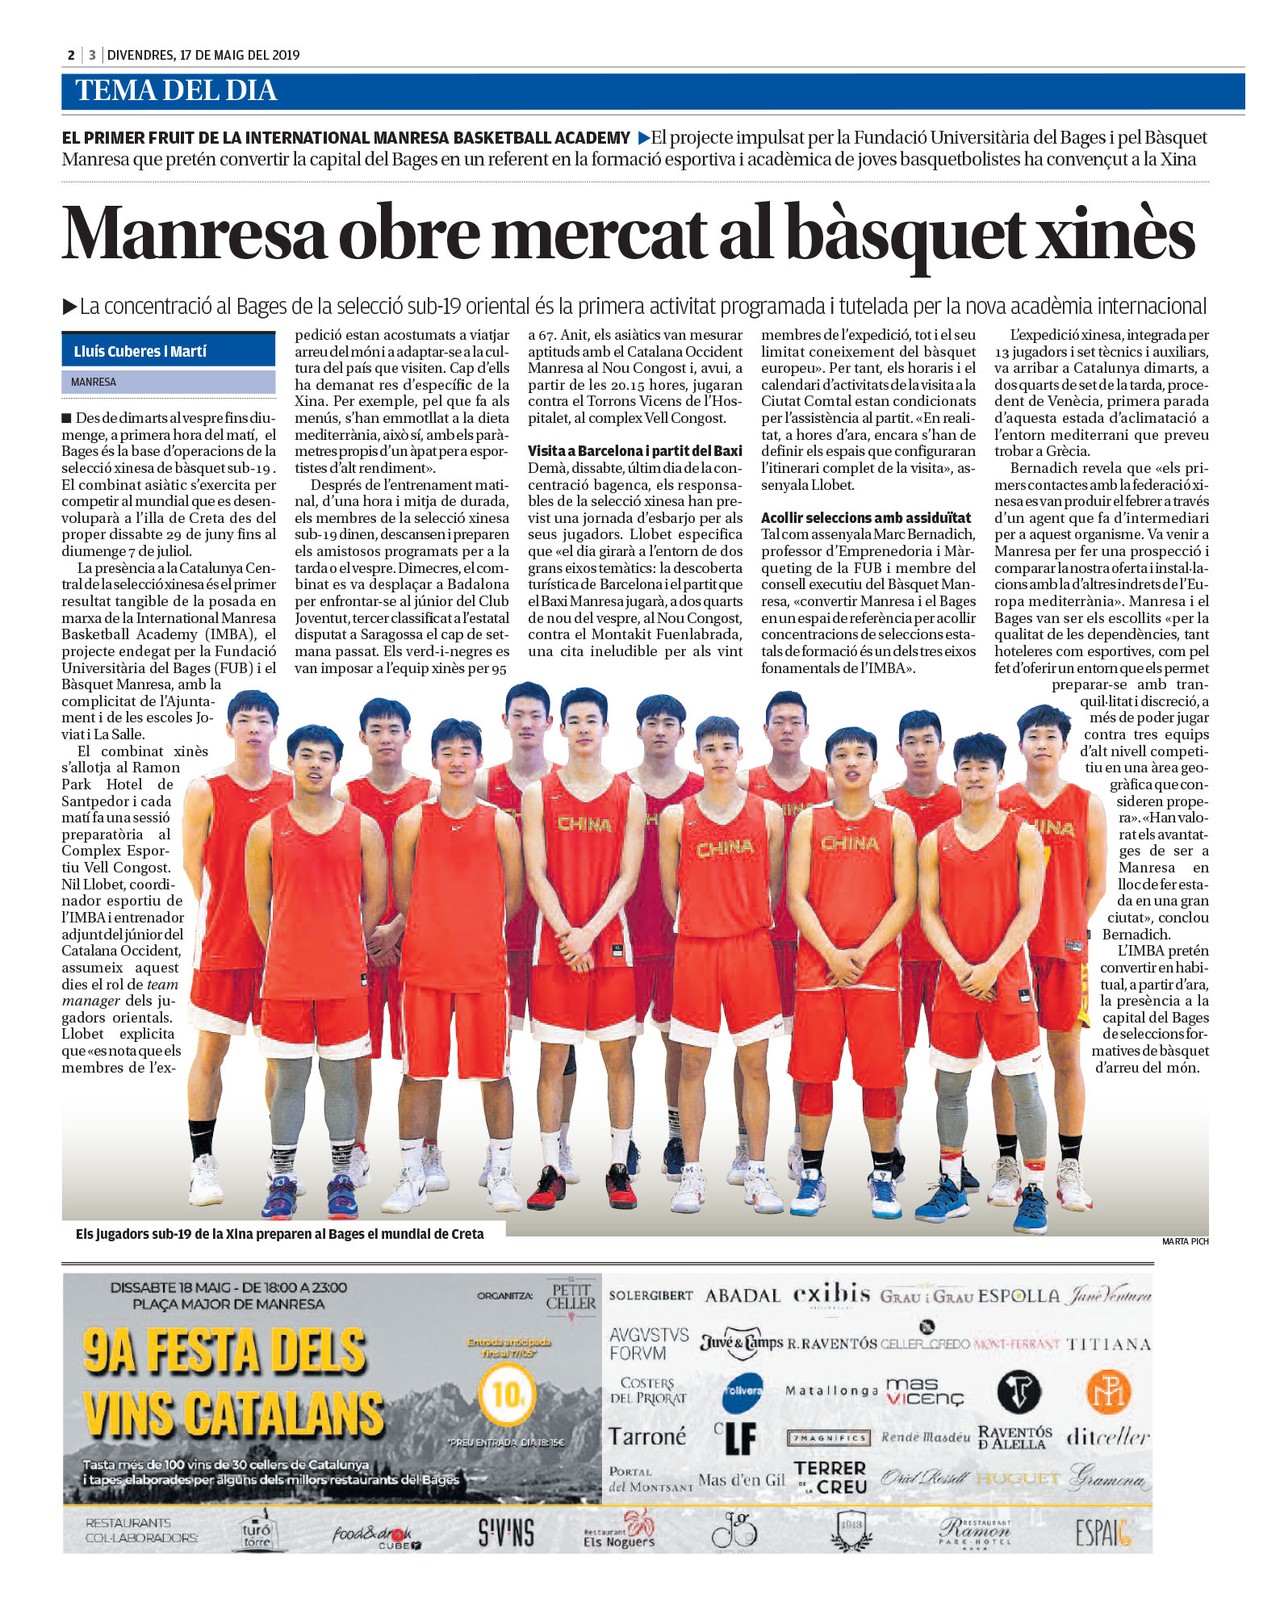 The stay of the chinese U19 national team in Manresa has a presence in the media